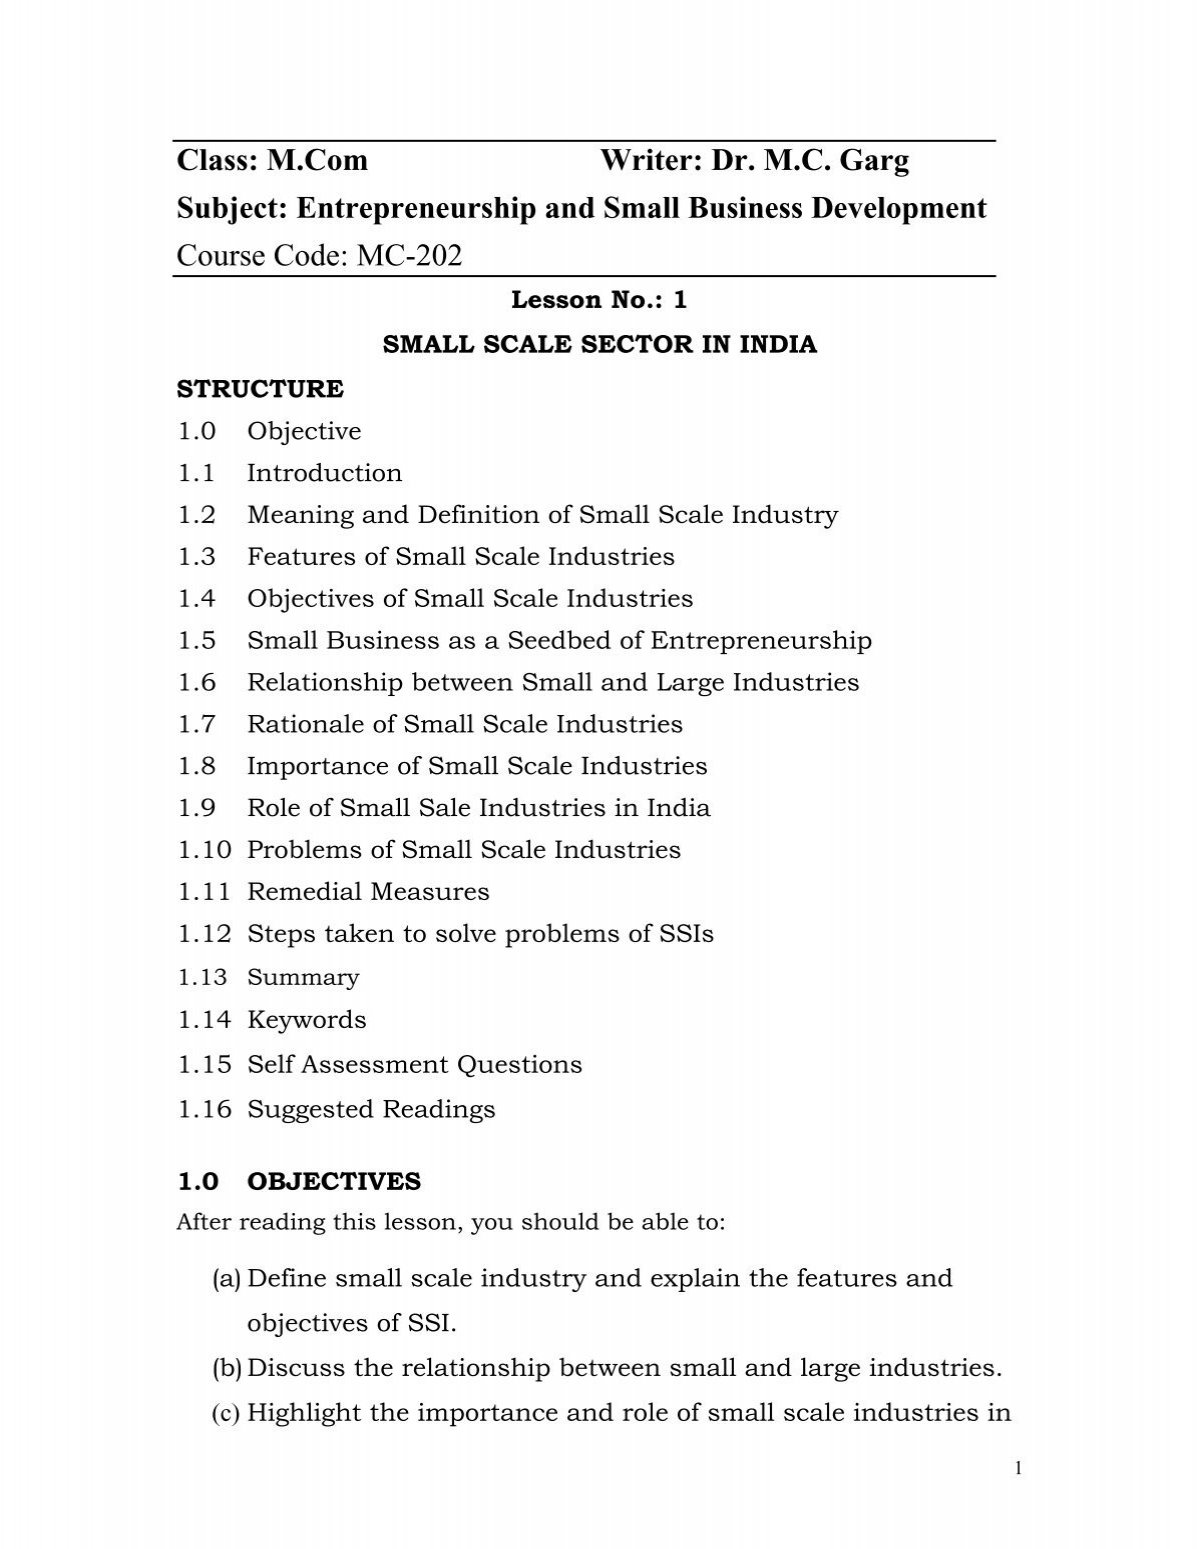 Introduction to small scale enterprises